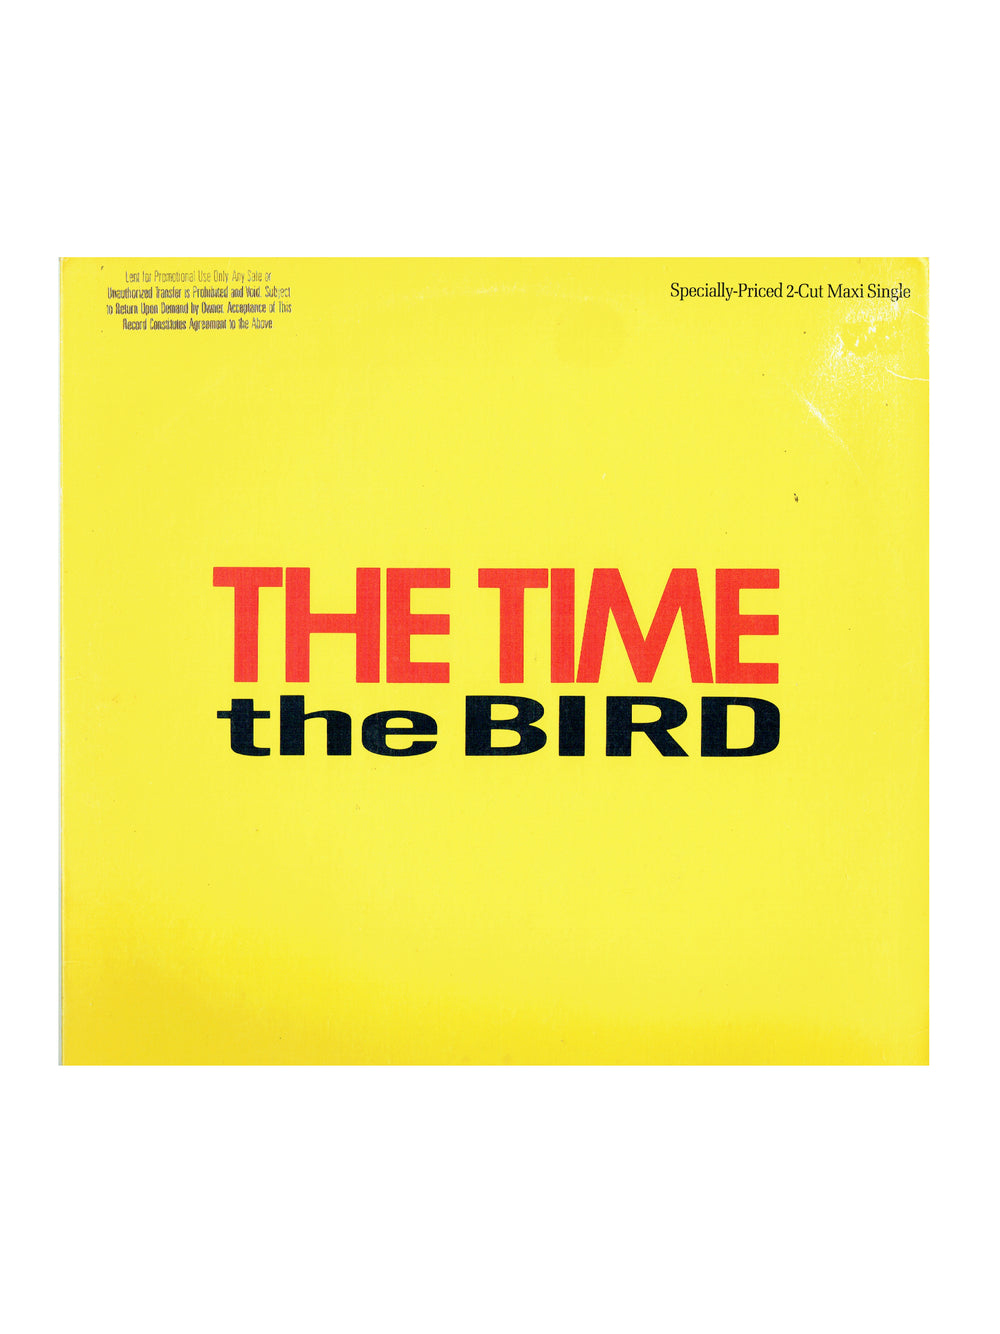 Prince – The Time The Bird (Remix)12 Inch Vinyl Single USA Release GOLD STAMP